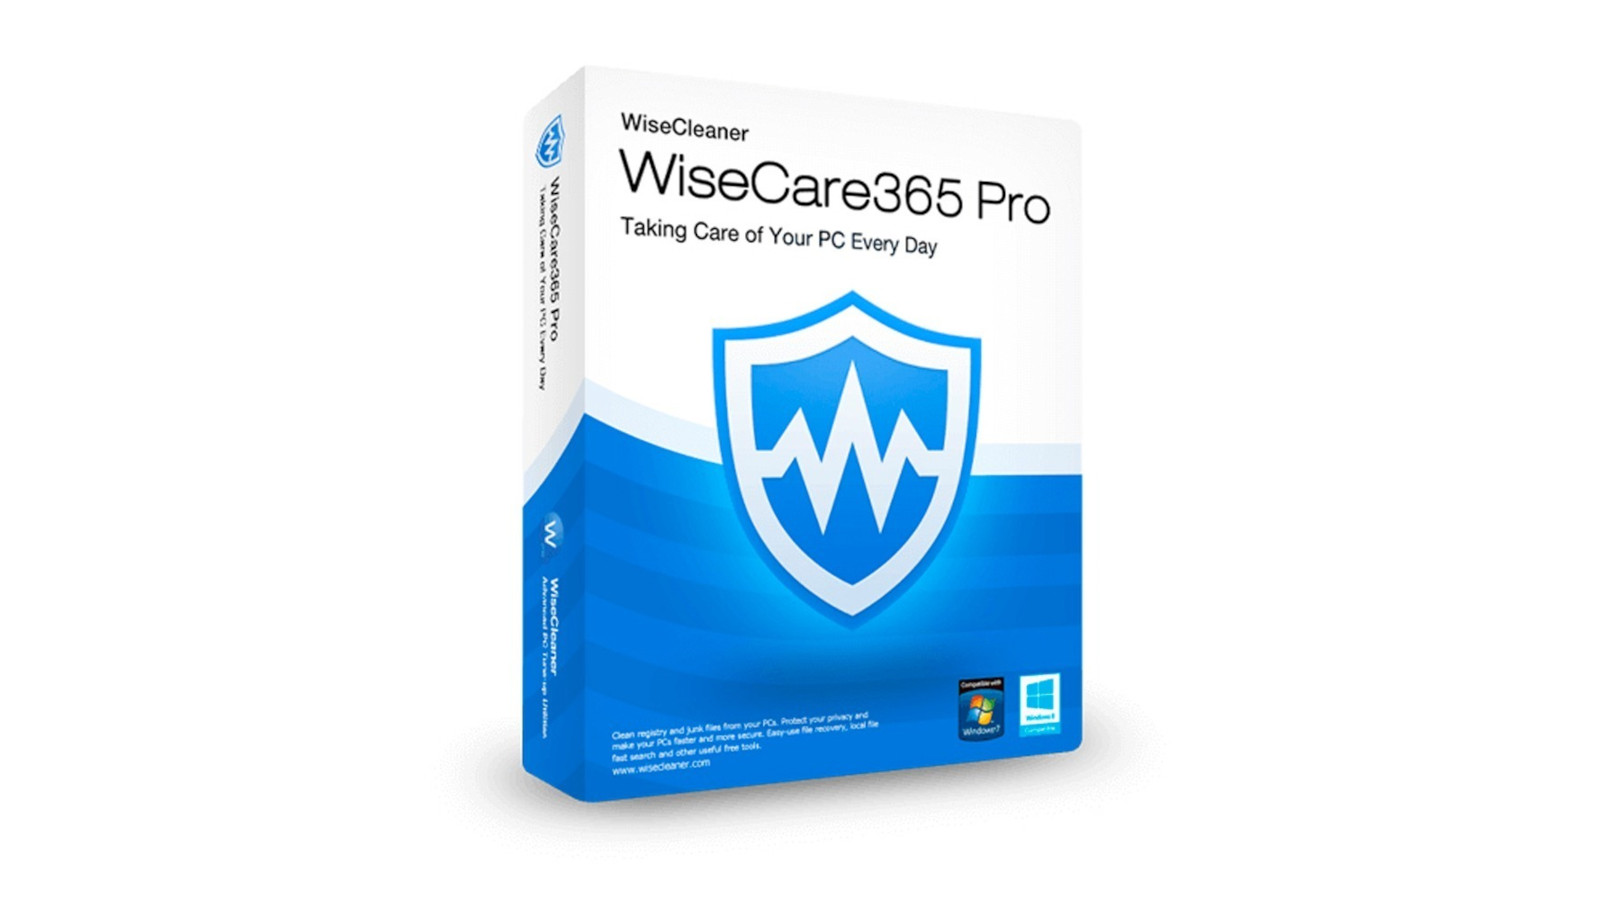 Wise Care 365 PRO CD Key (1 Year / 1 PC), 18.05$